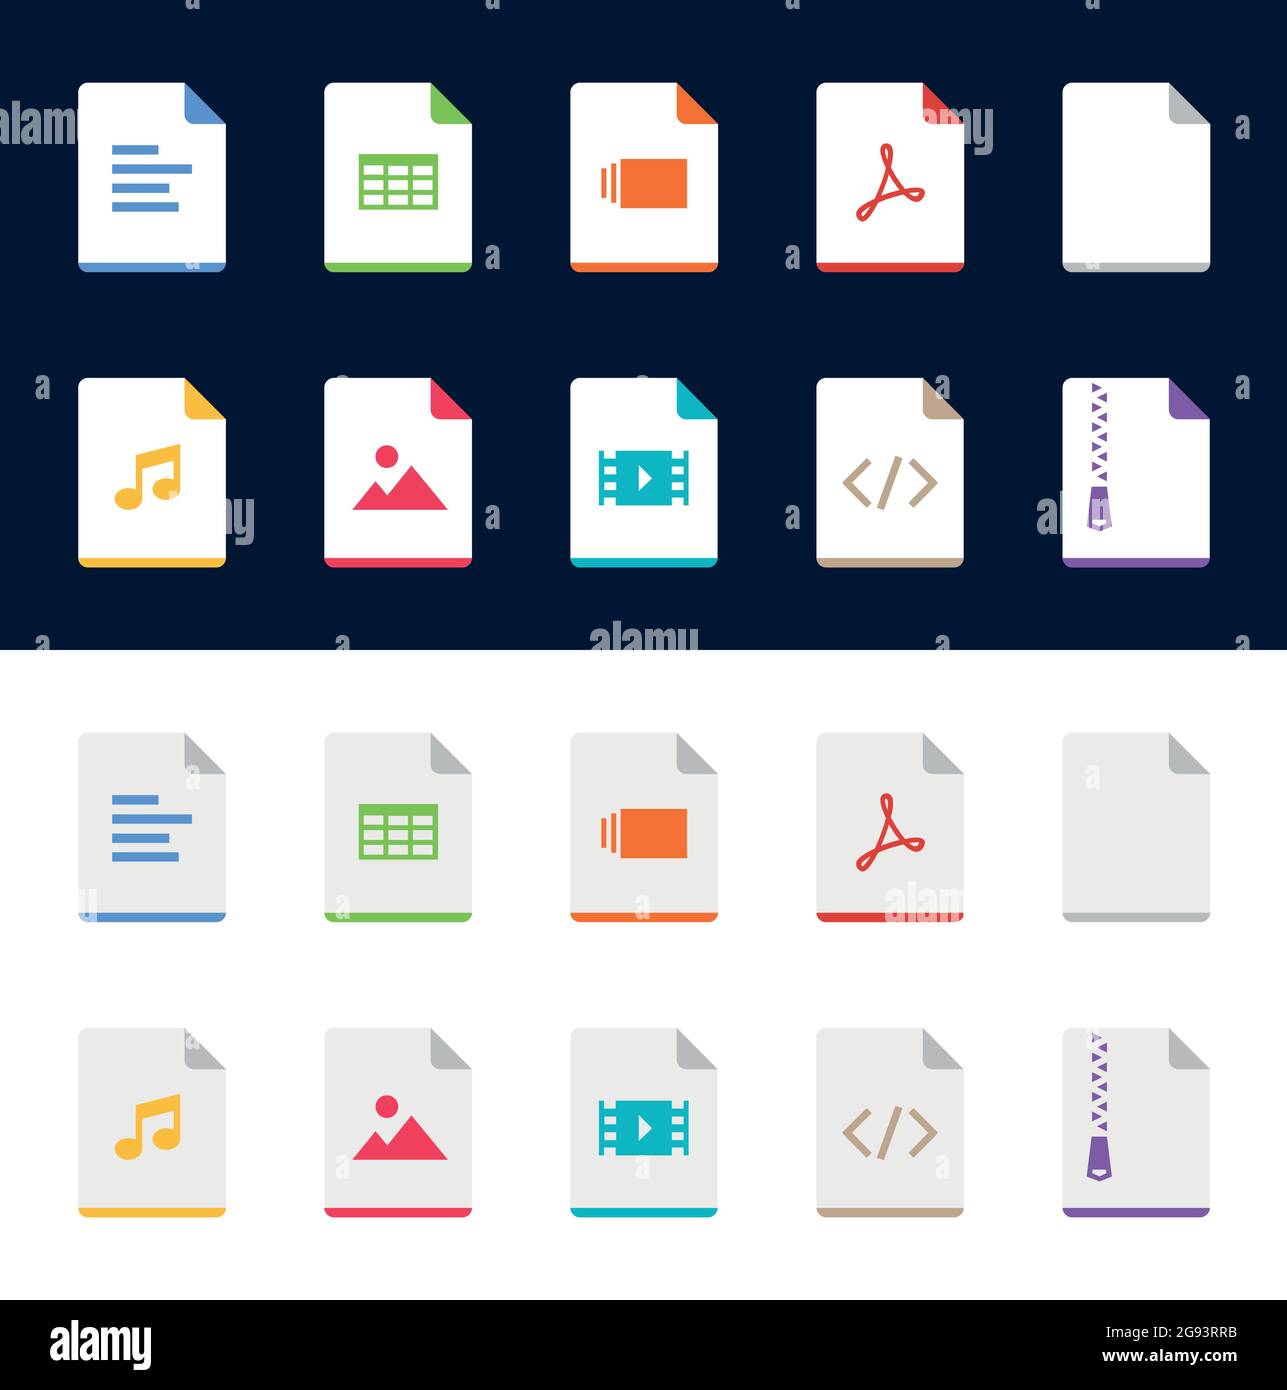 File type icons pack with rounded corners for download links Stock Vector